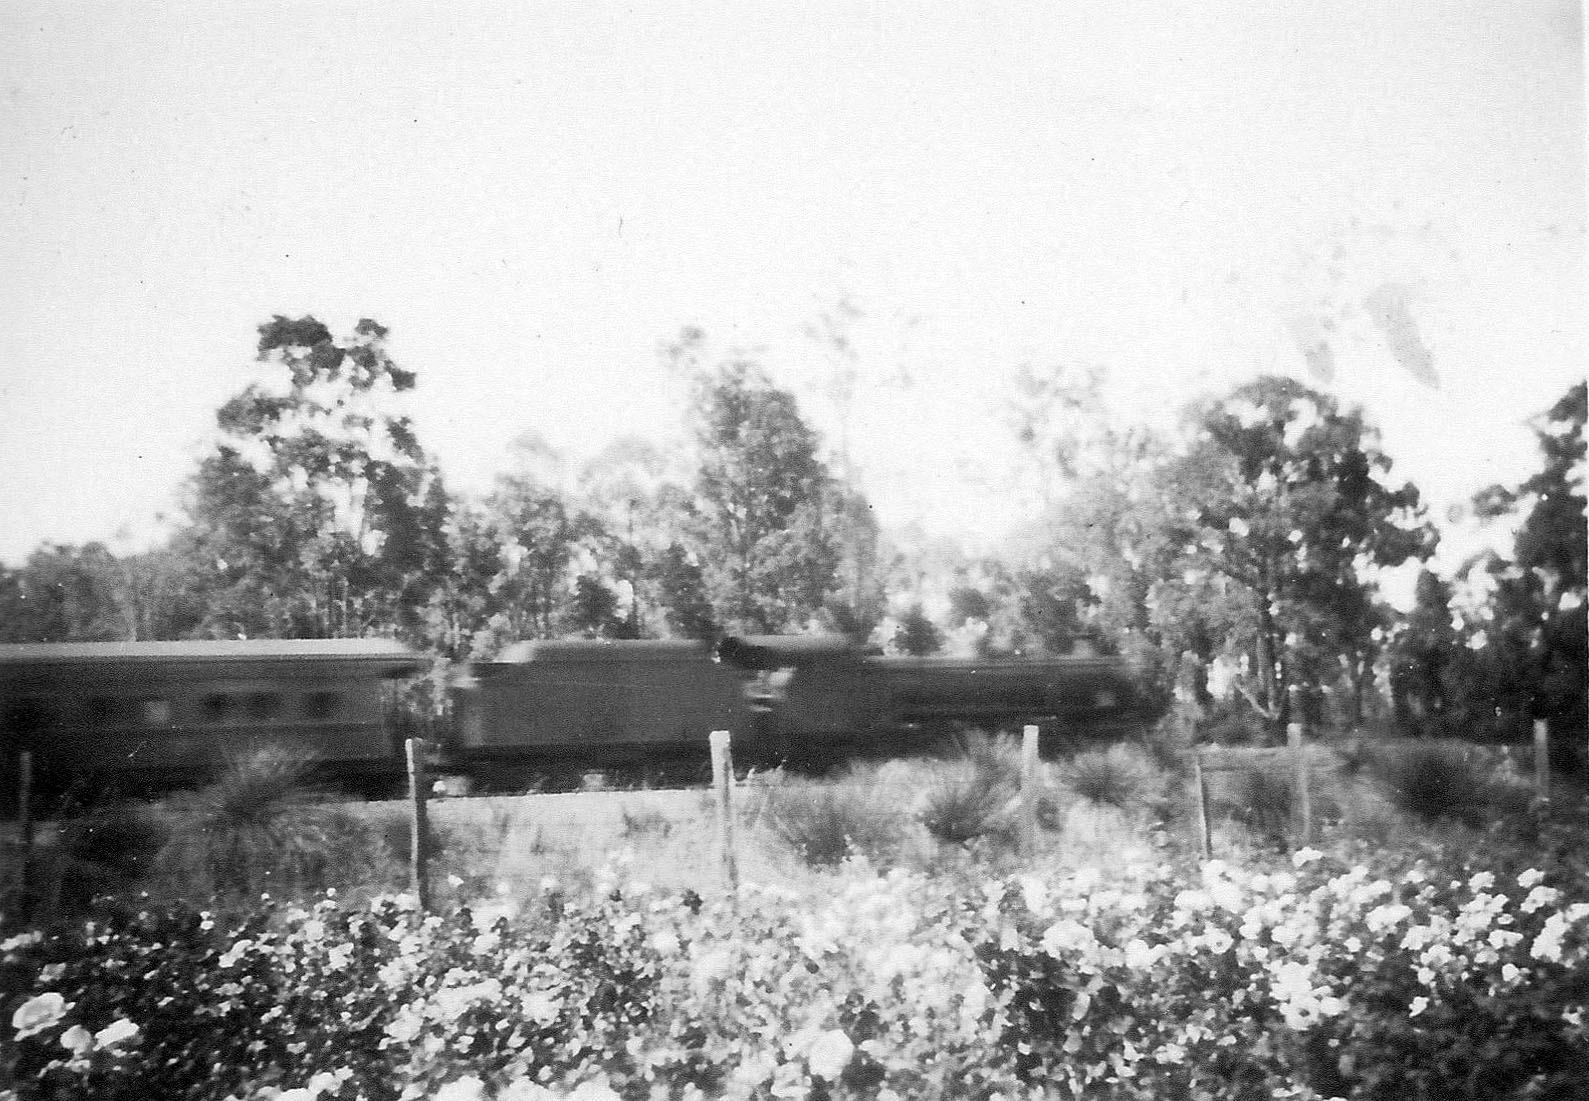 Photo of train from Bommeli's property.